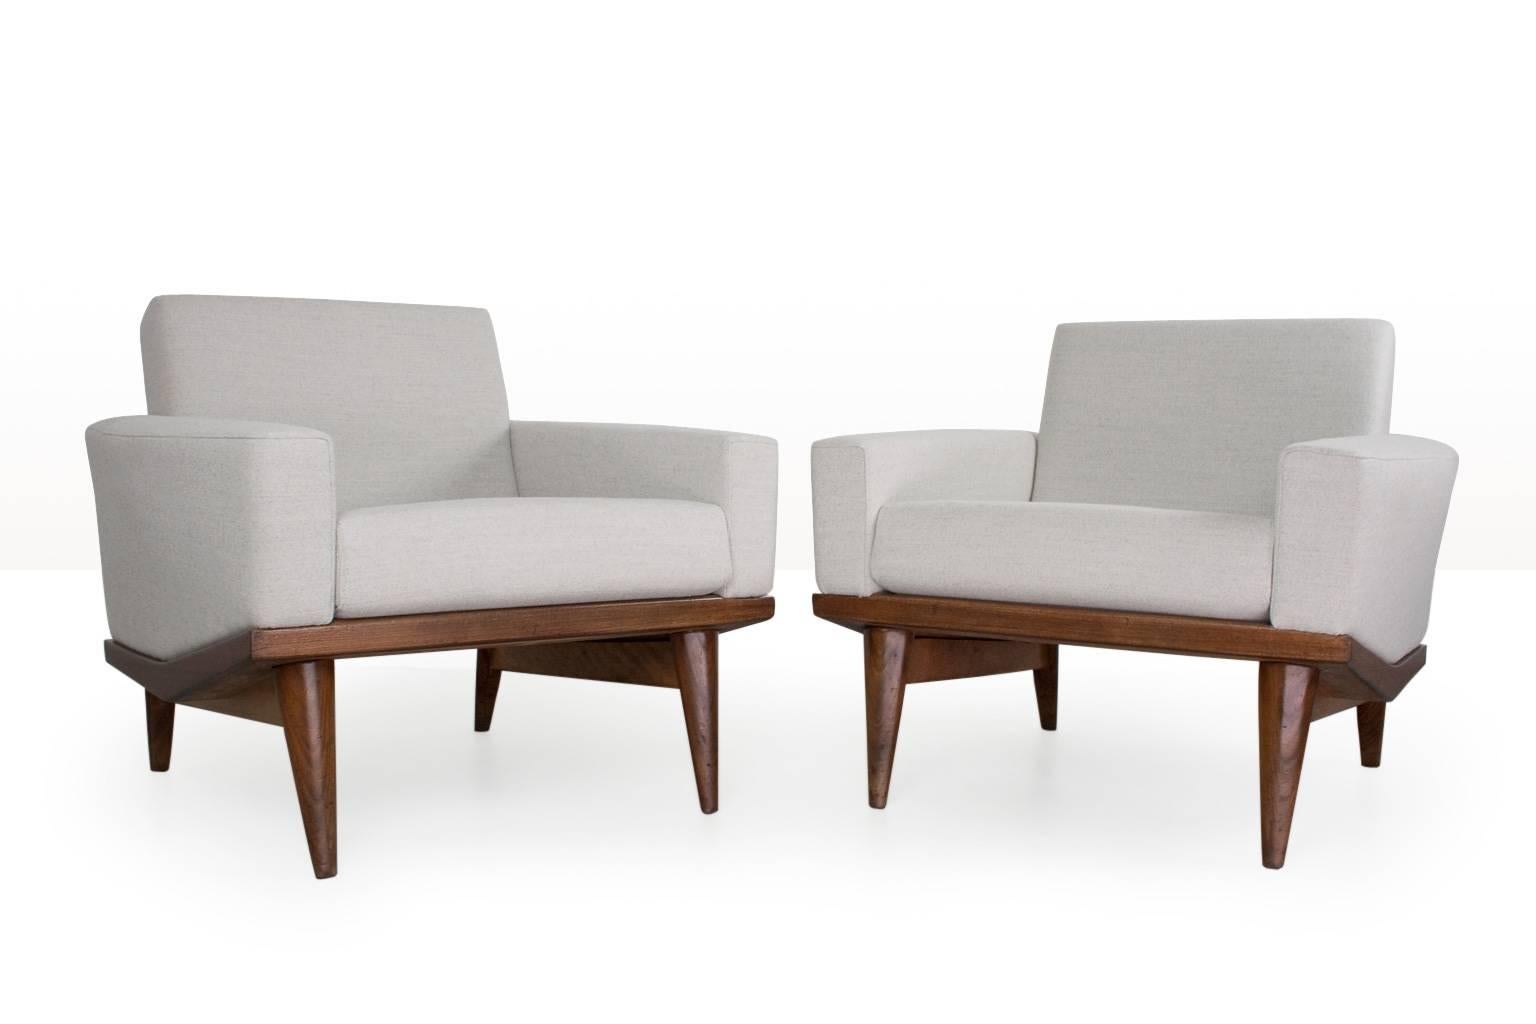 Pair of Illum WIkkelso lounge chairs, new upholstered in a excellent quality light grey Ploegwool (no.98) on a teak wooden frame. In excellent condition. The design is often referred to as the 'Australia' design. The sharp finishes of the